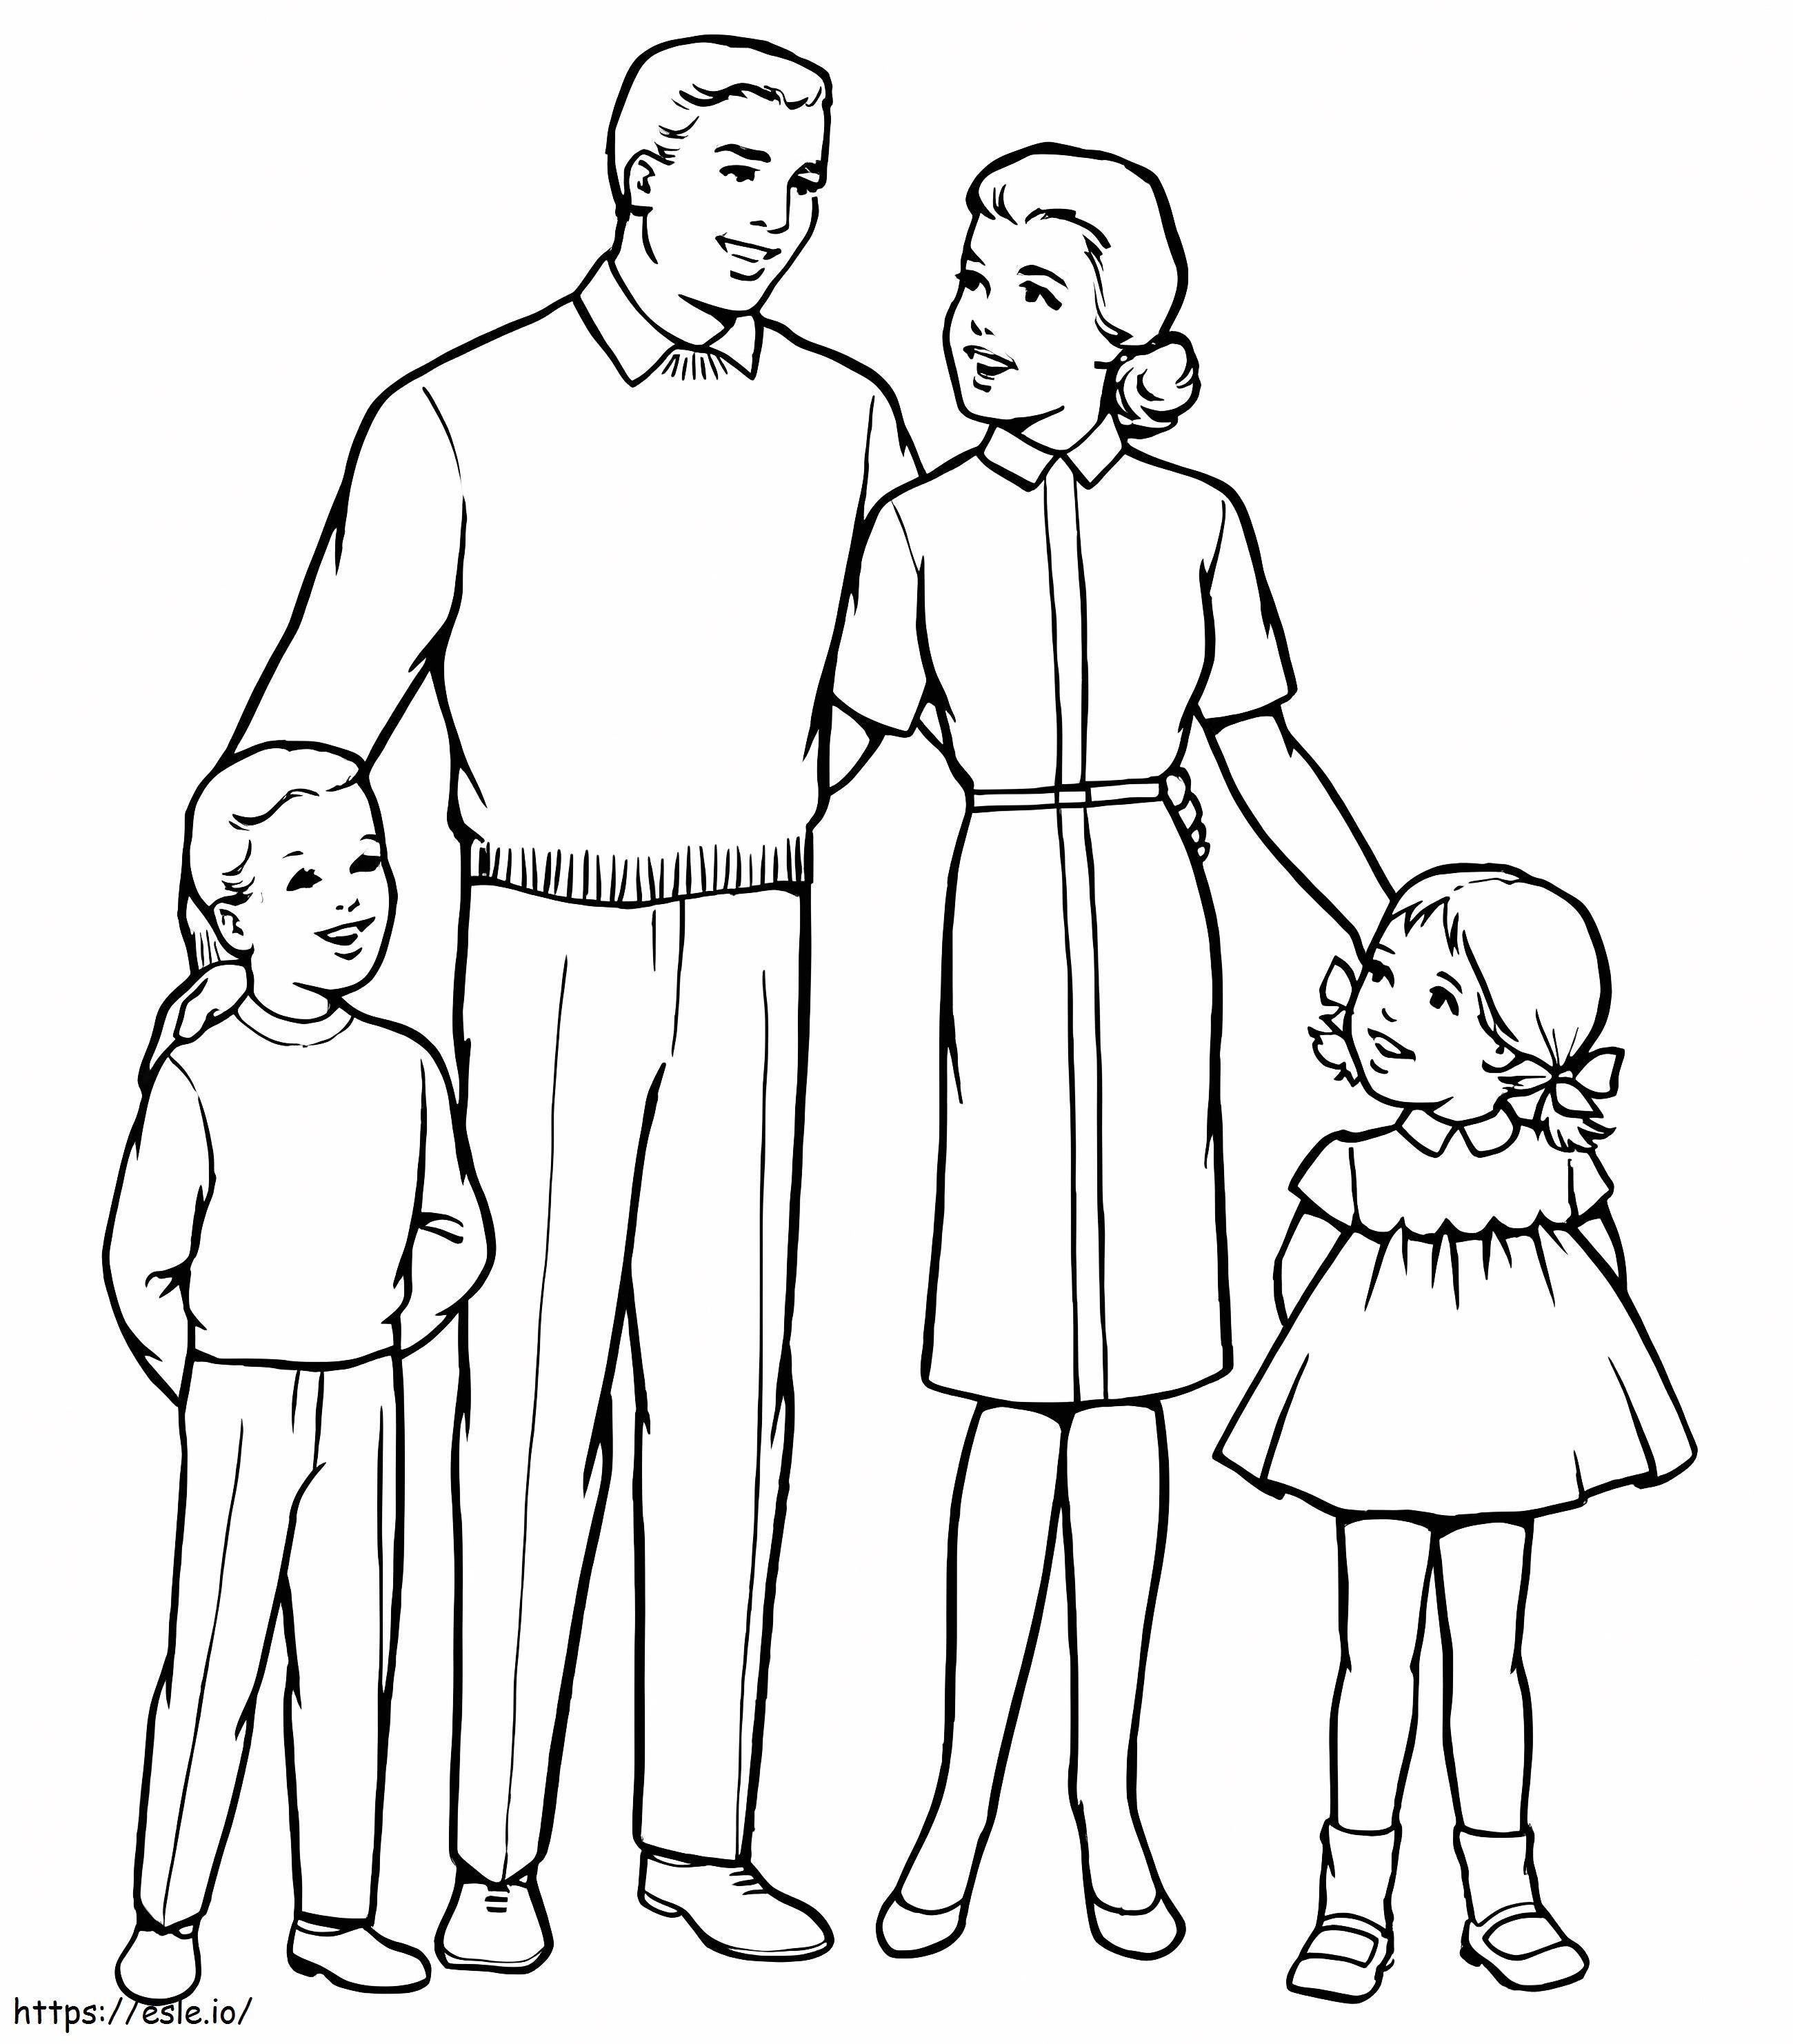 Basic Family coloring page